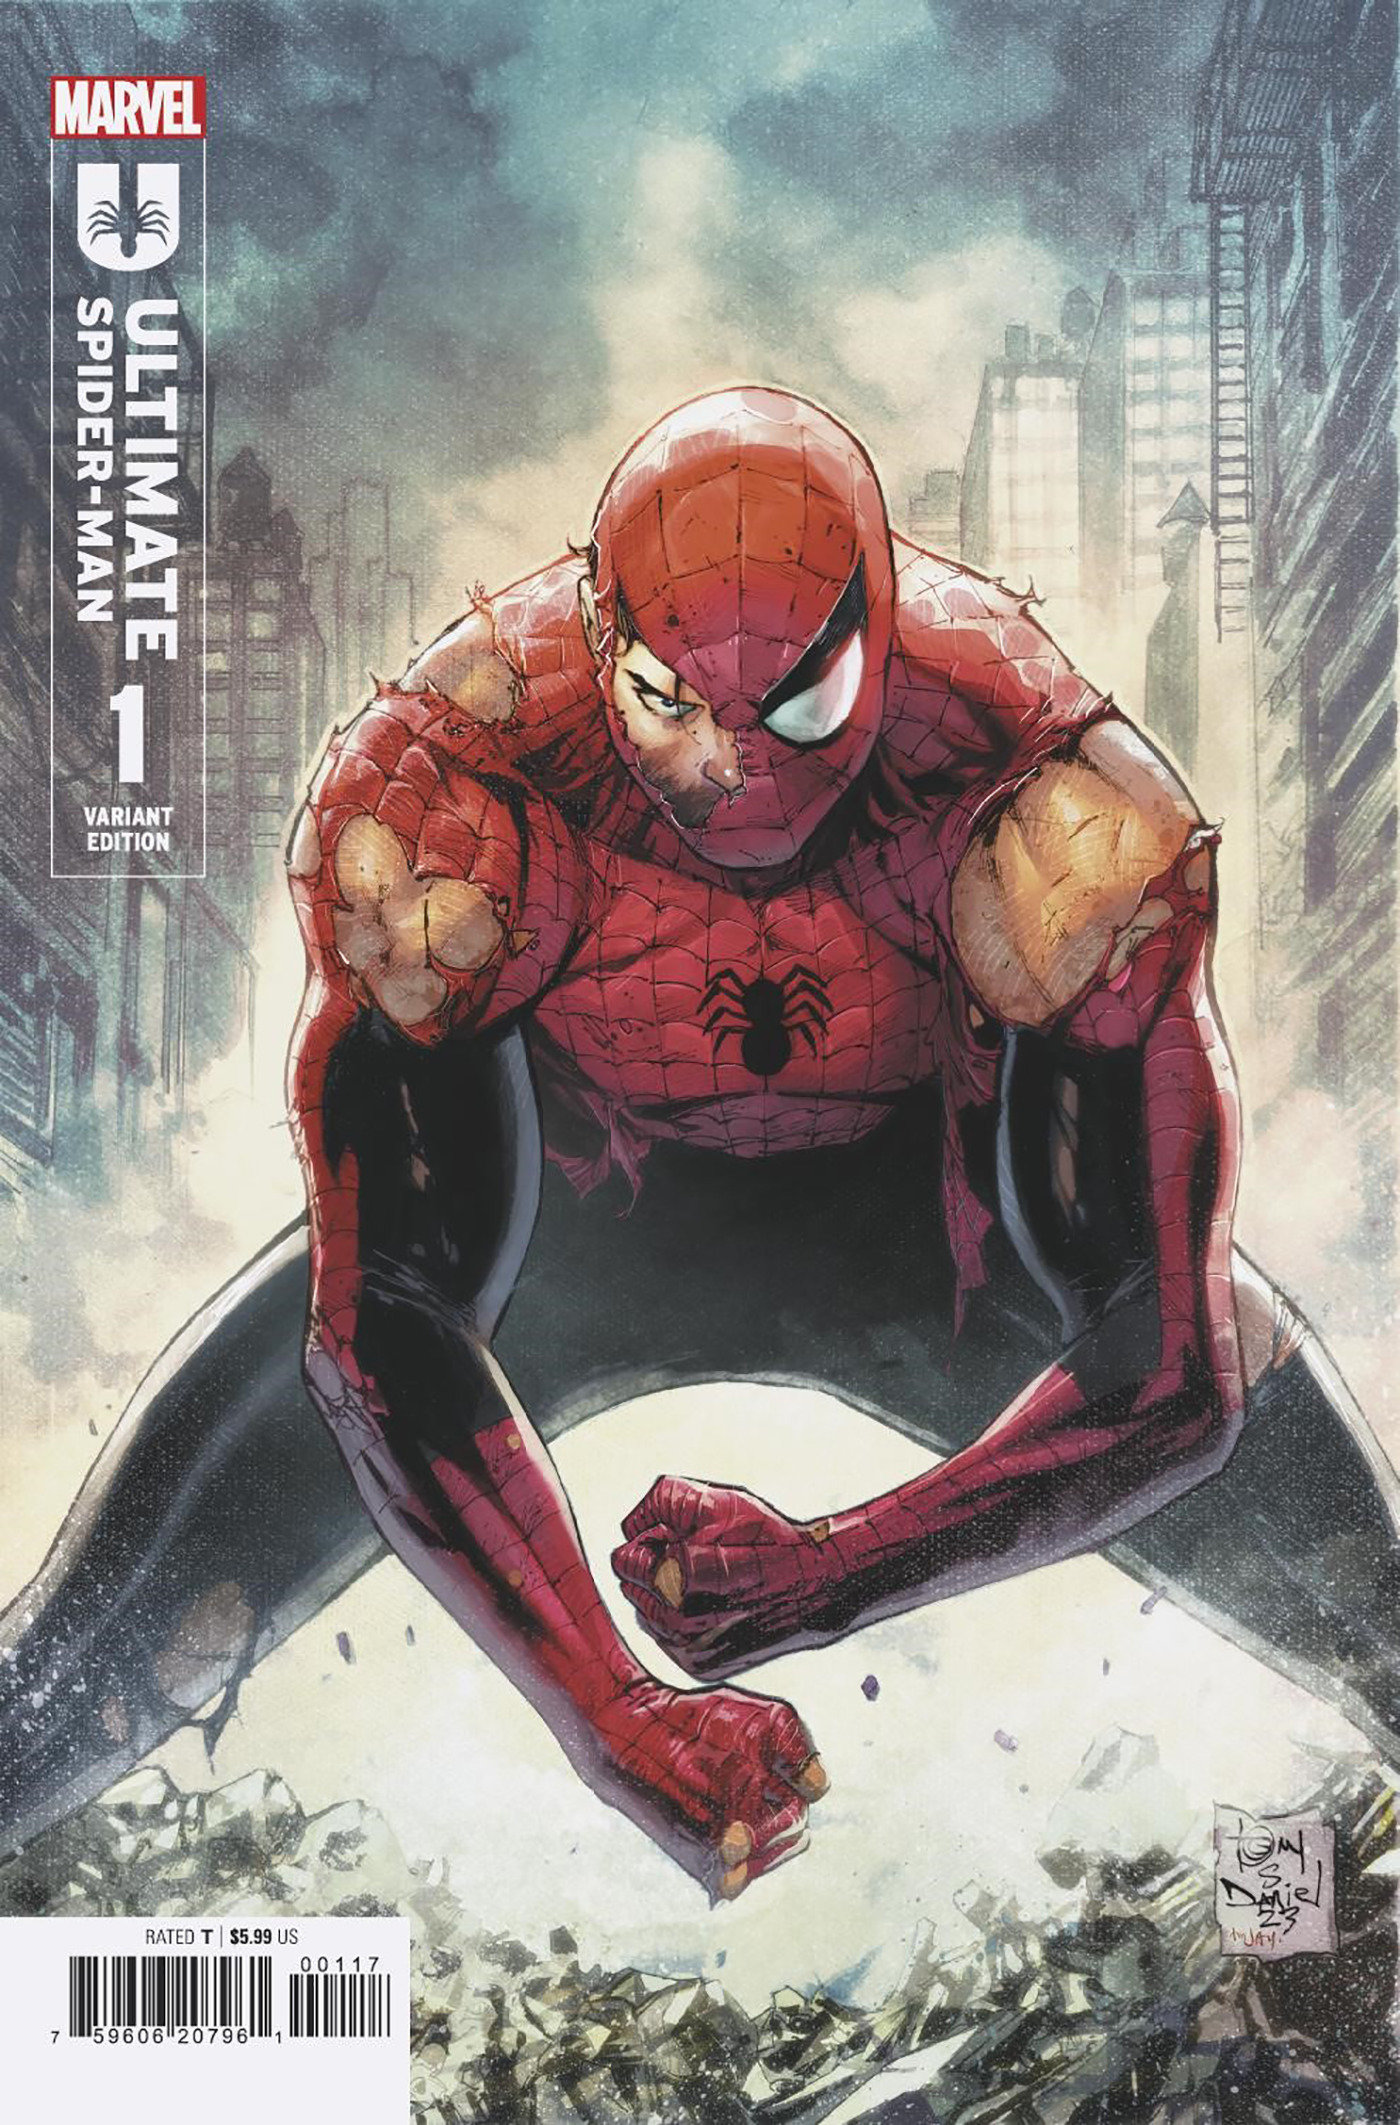 Ultimate Spider-Man #1 Tony Daniel Variant 1 for 25 Incentive